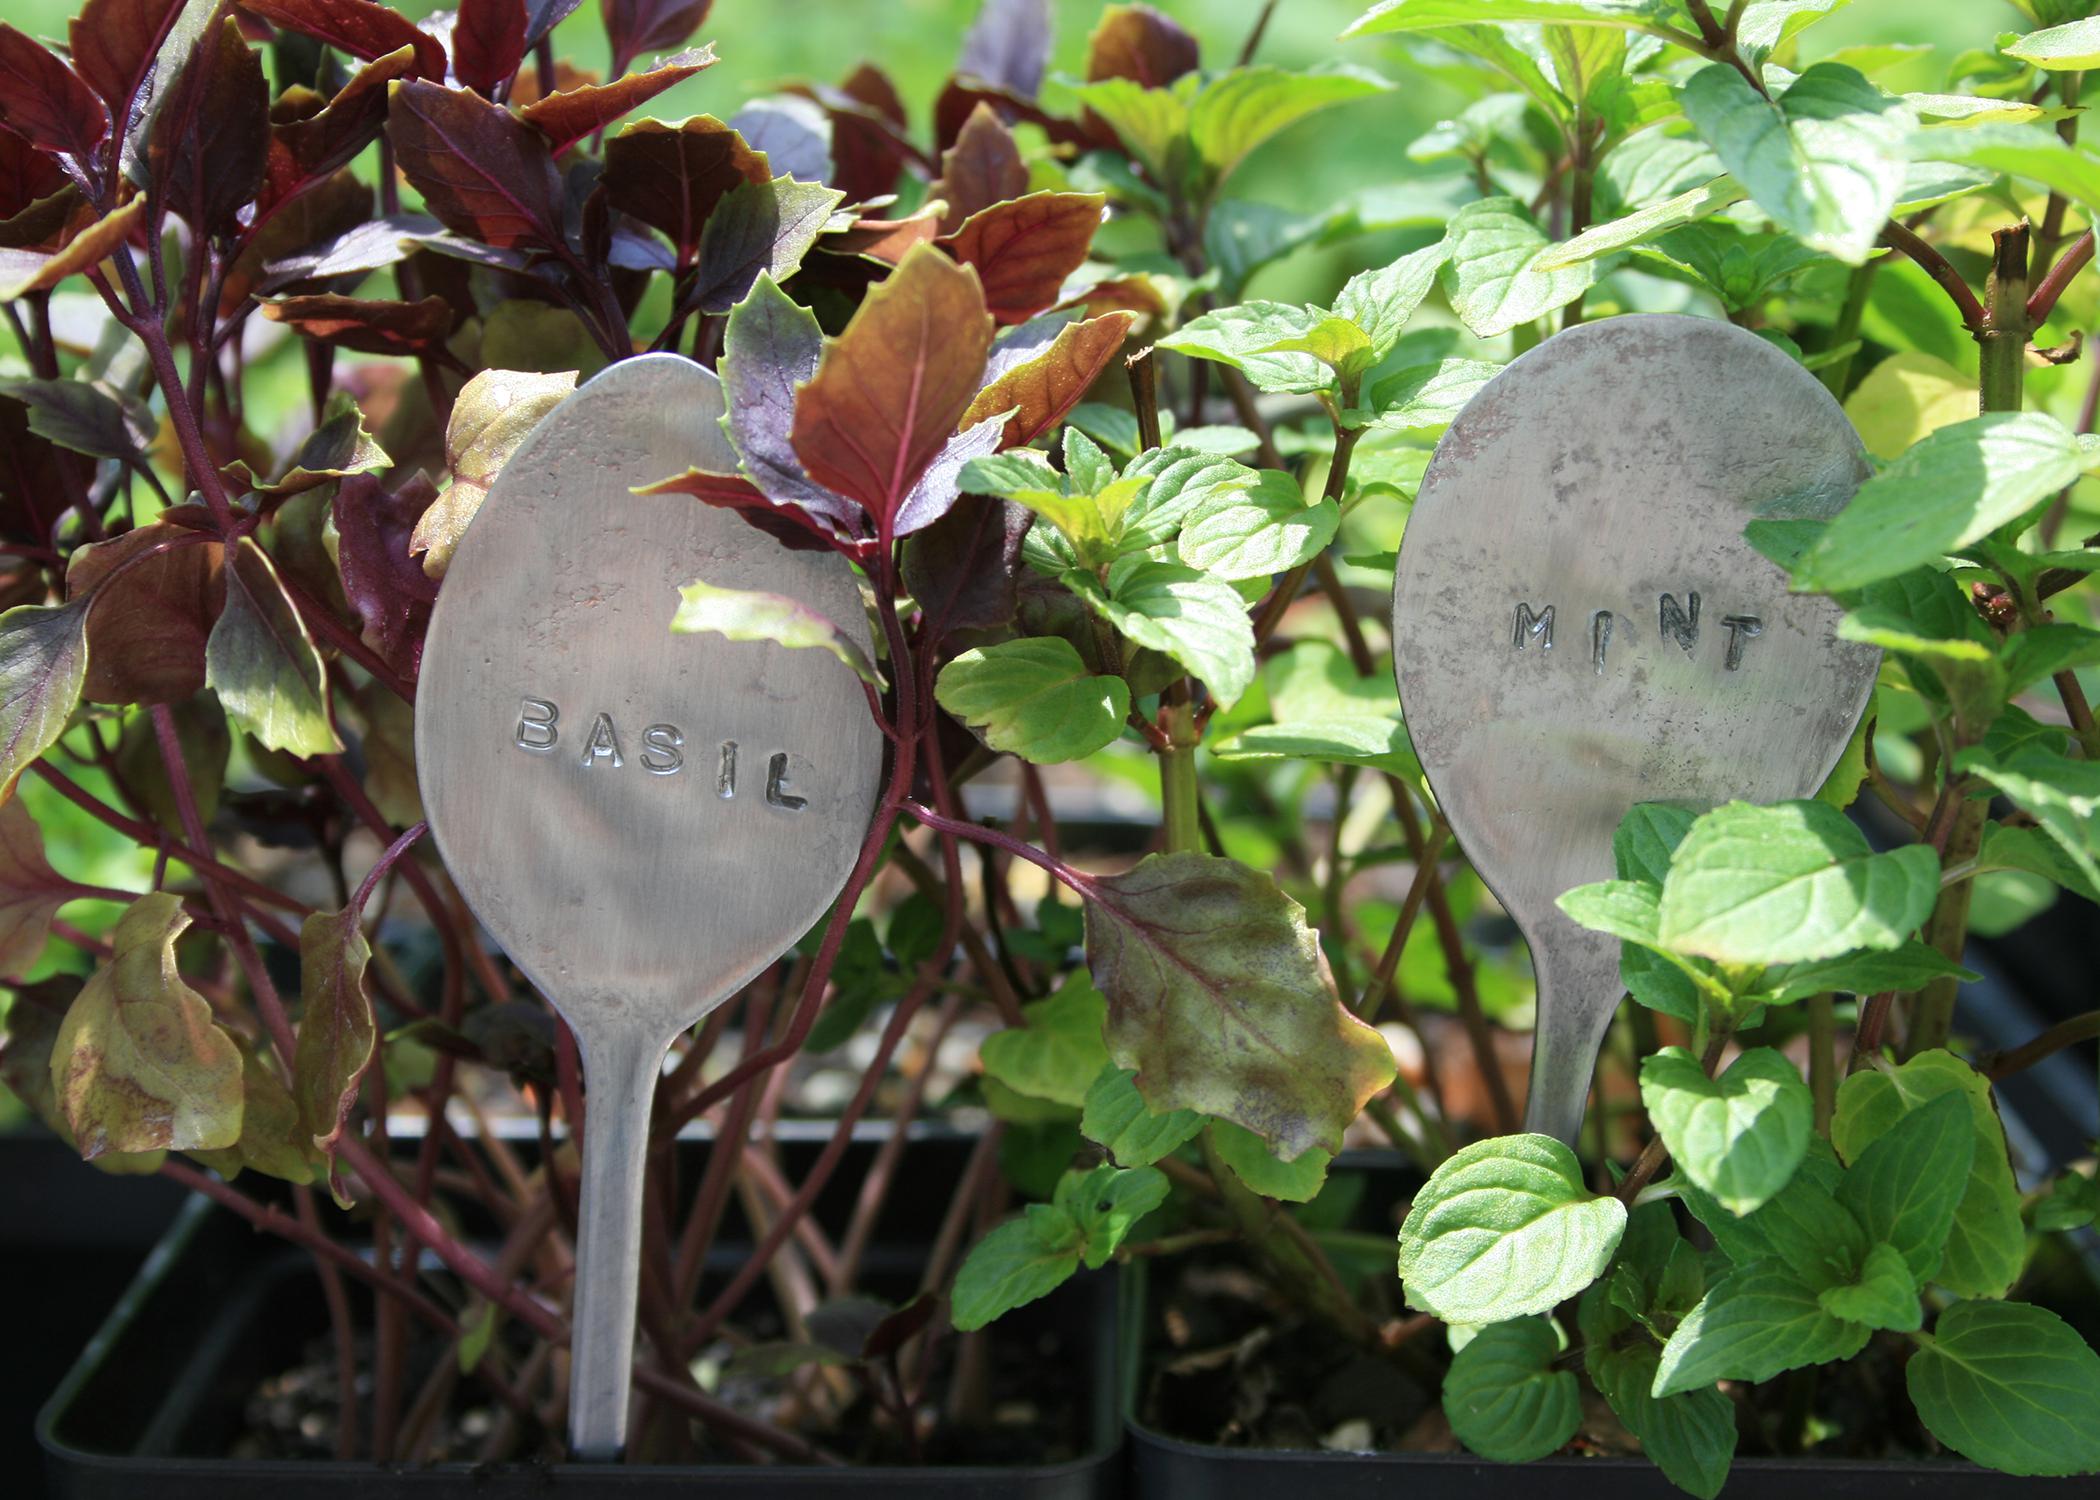 Flatten old spoons to use as plant markers, and use letter punches to stencil in the plant name. (Photo by MSU Extension Service/Gary Bachman)